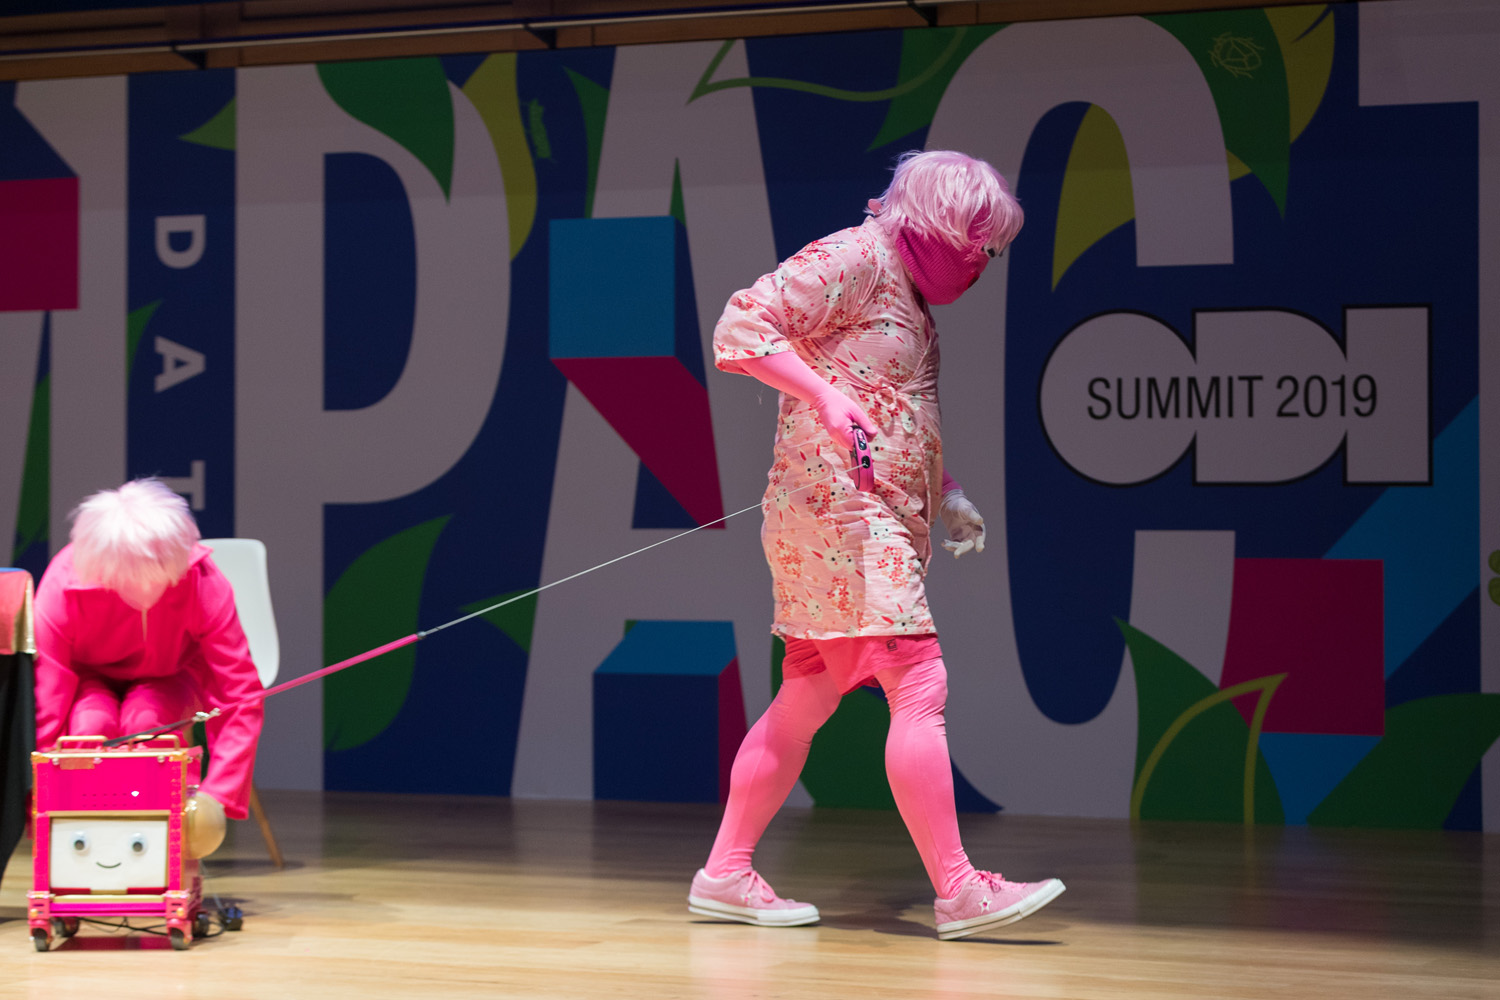 On a stage, a person dressed in pink, including a pink mask and pink wig, walking a pink robot with smiling face on a pink dog lead.